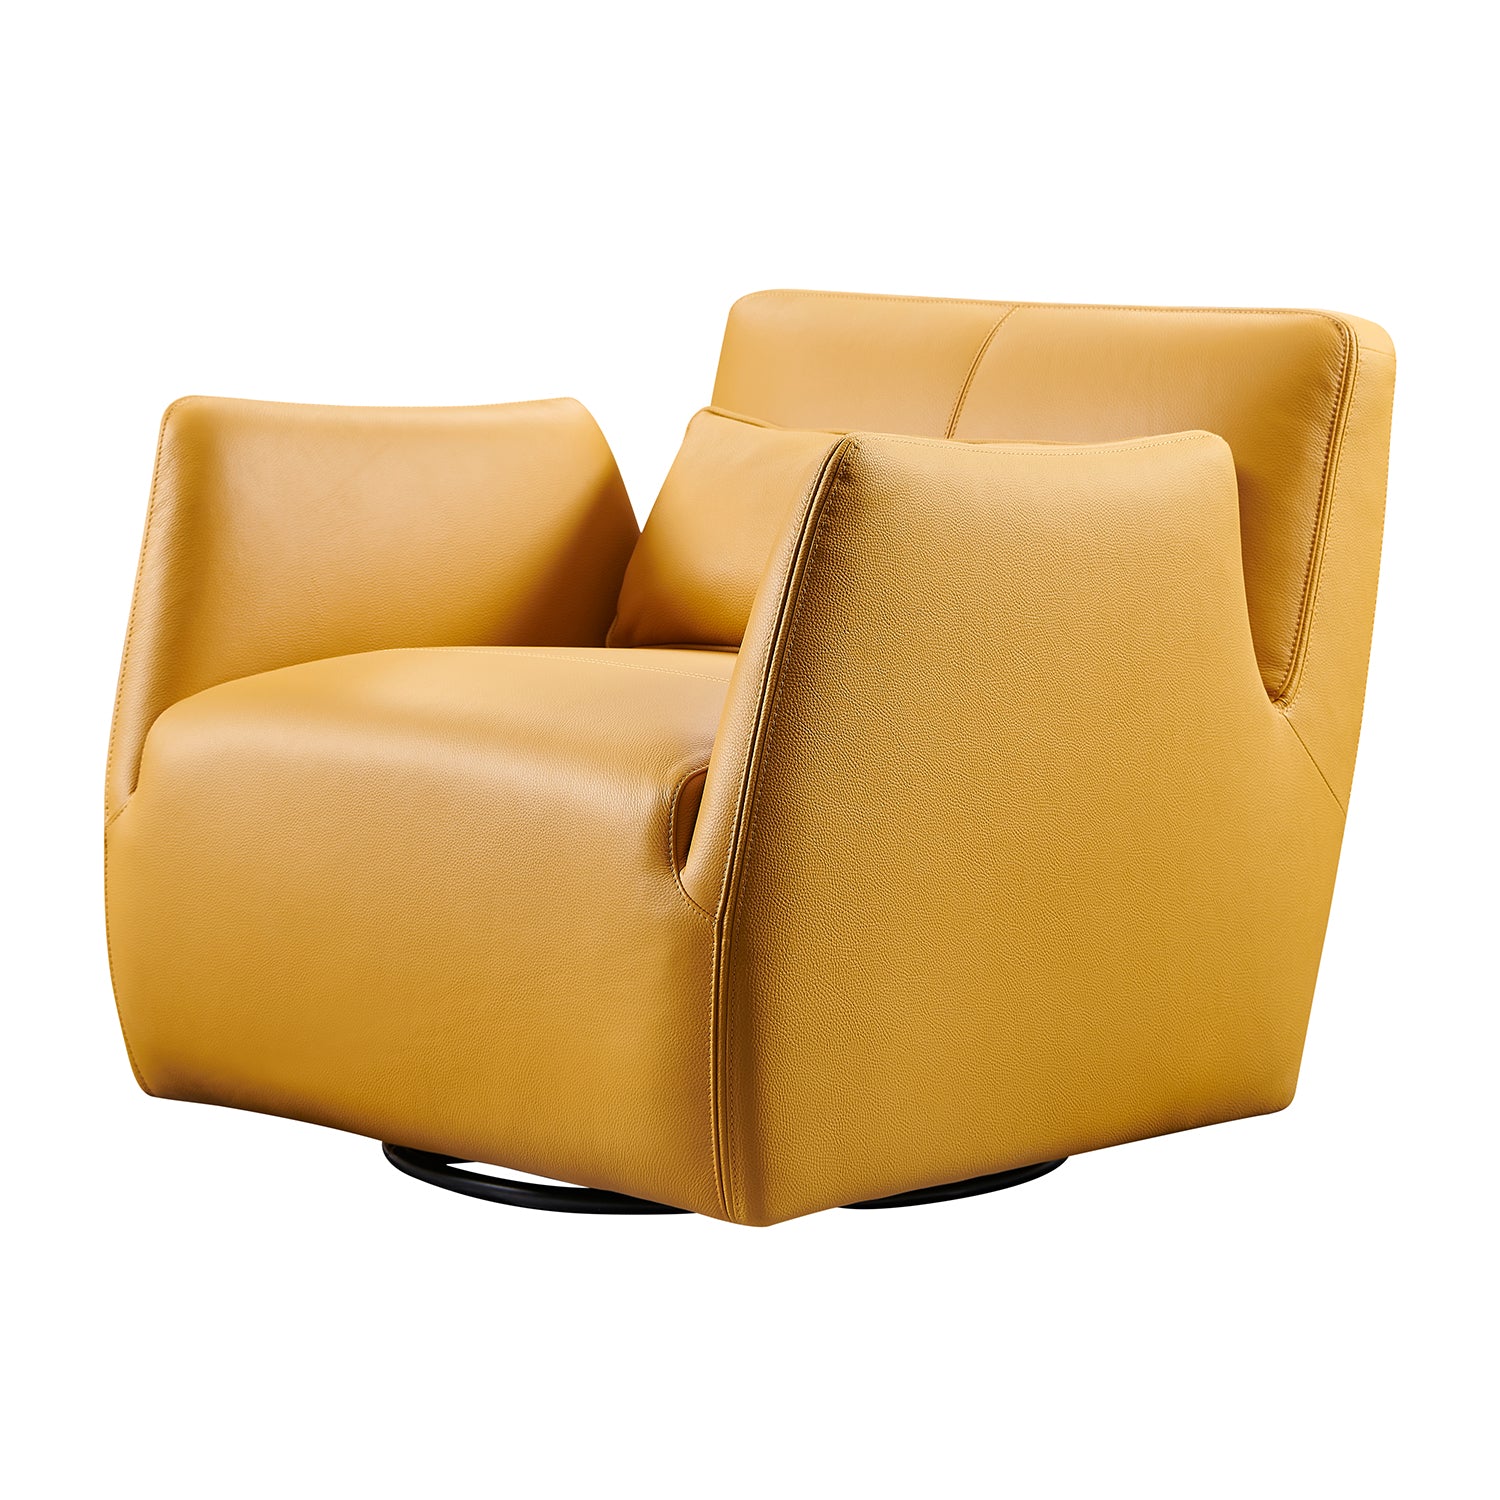 Chair COC1 - 003